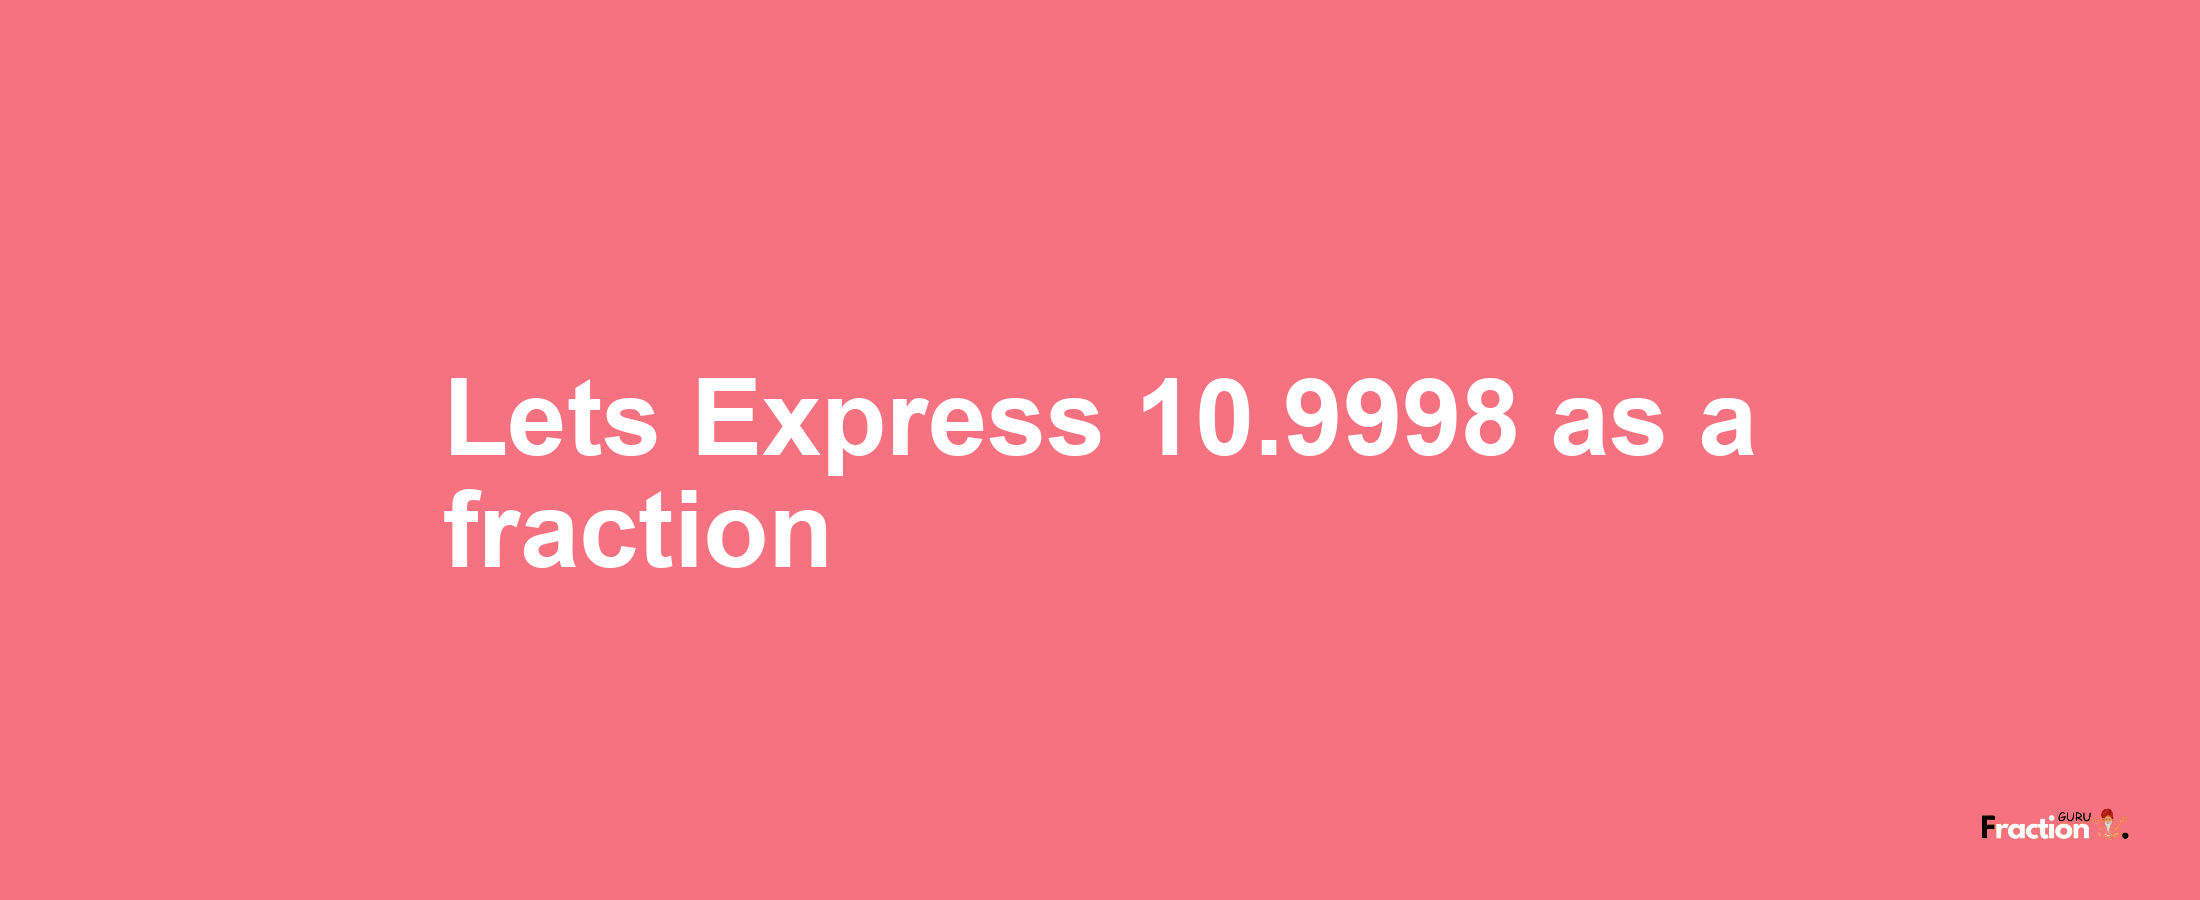 Lets Express 10.9998 as afraction